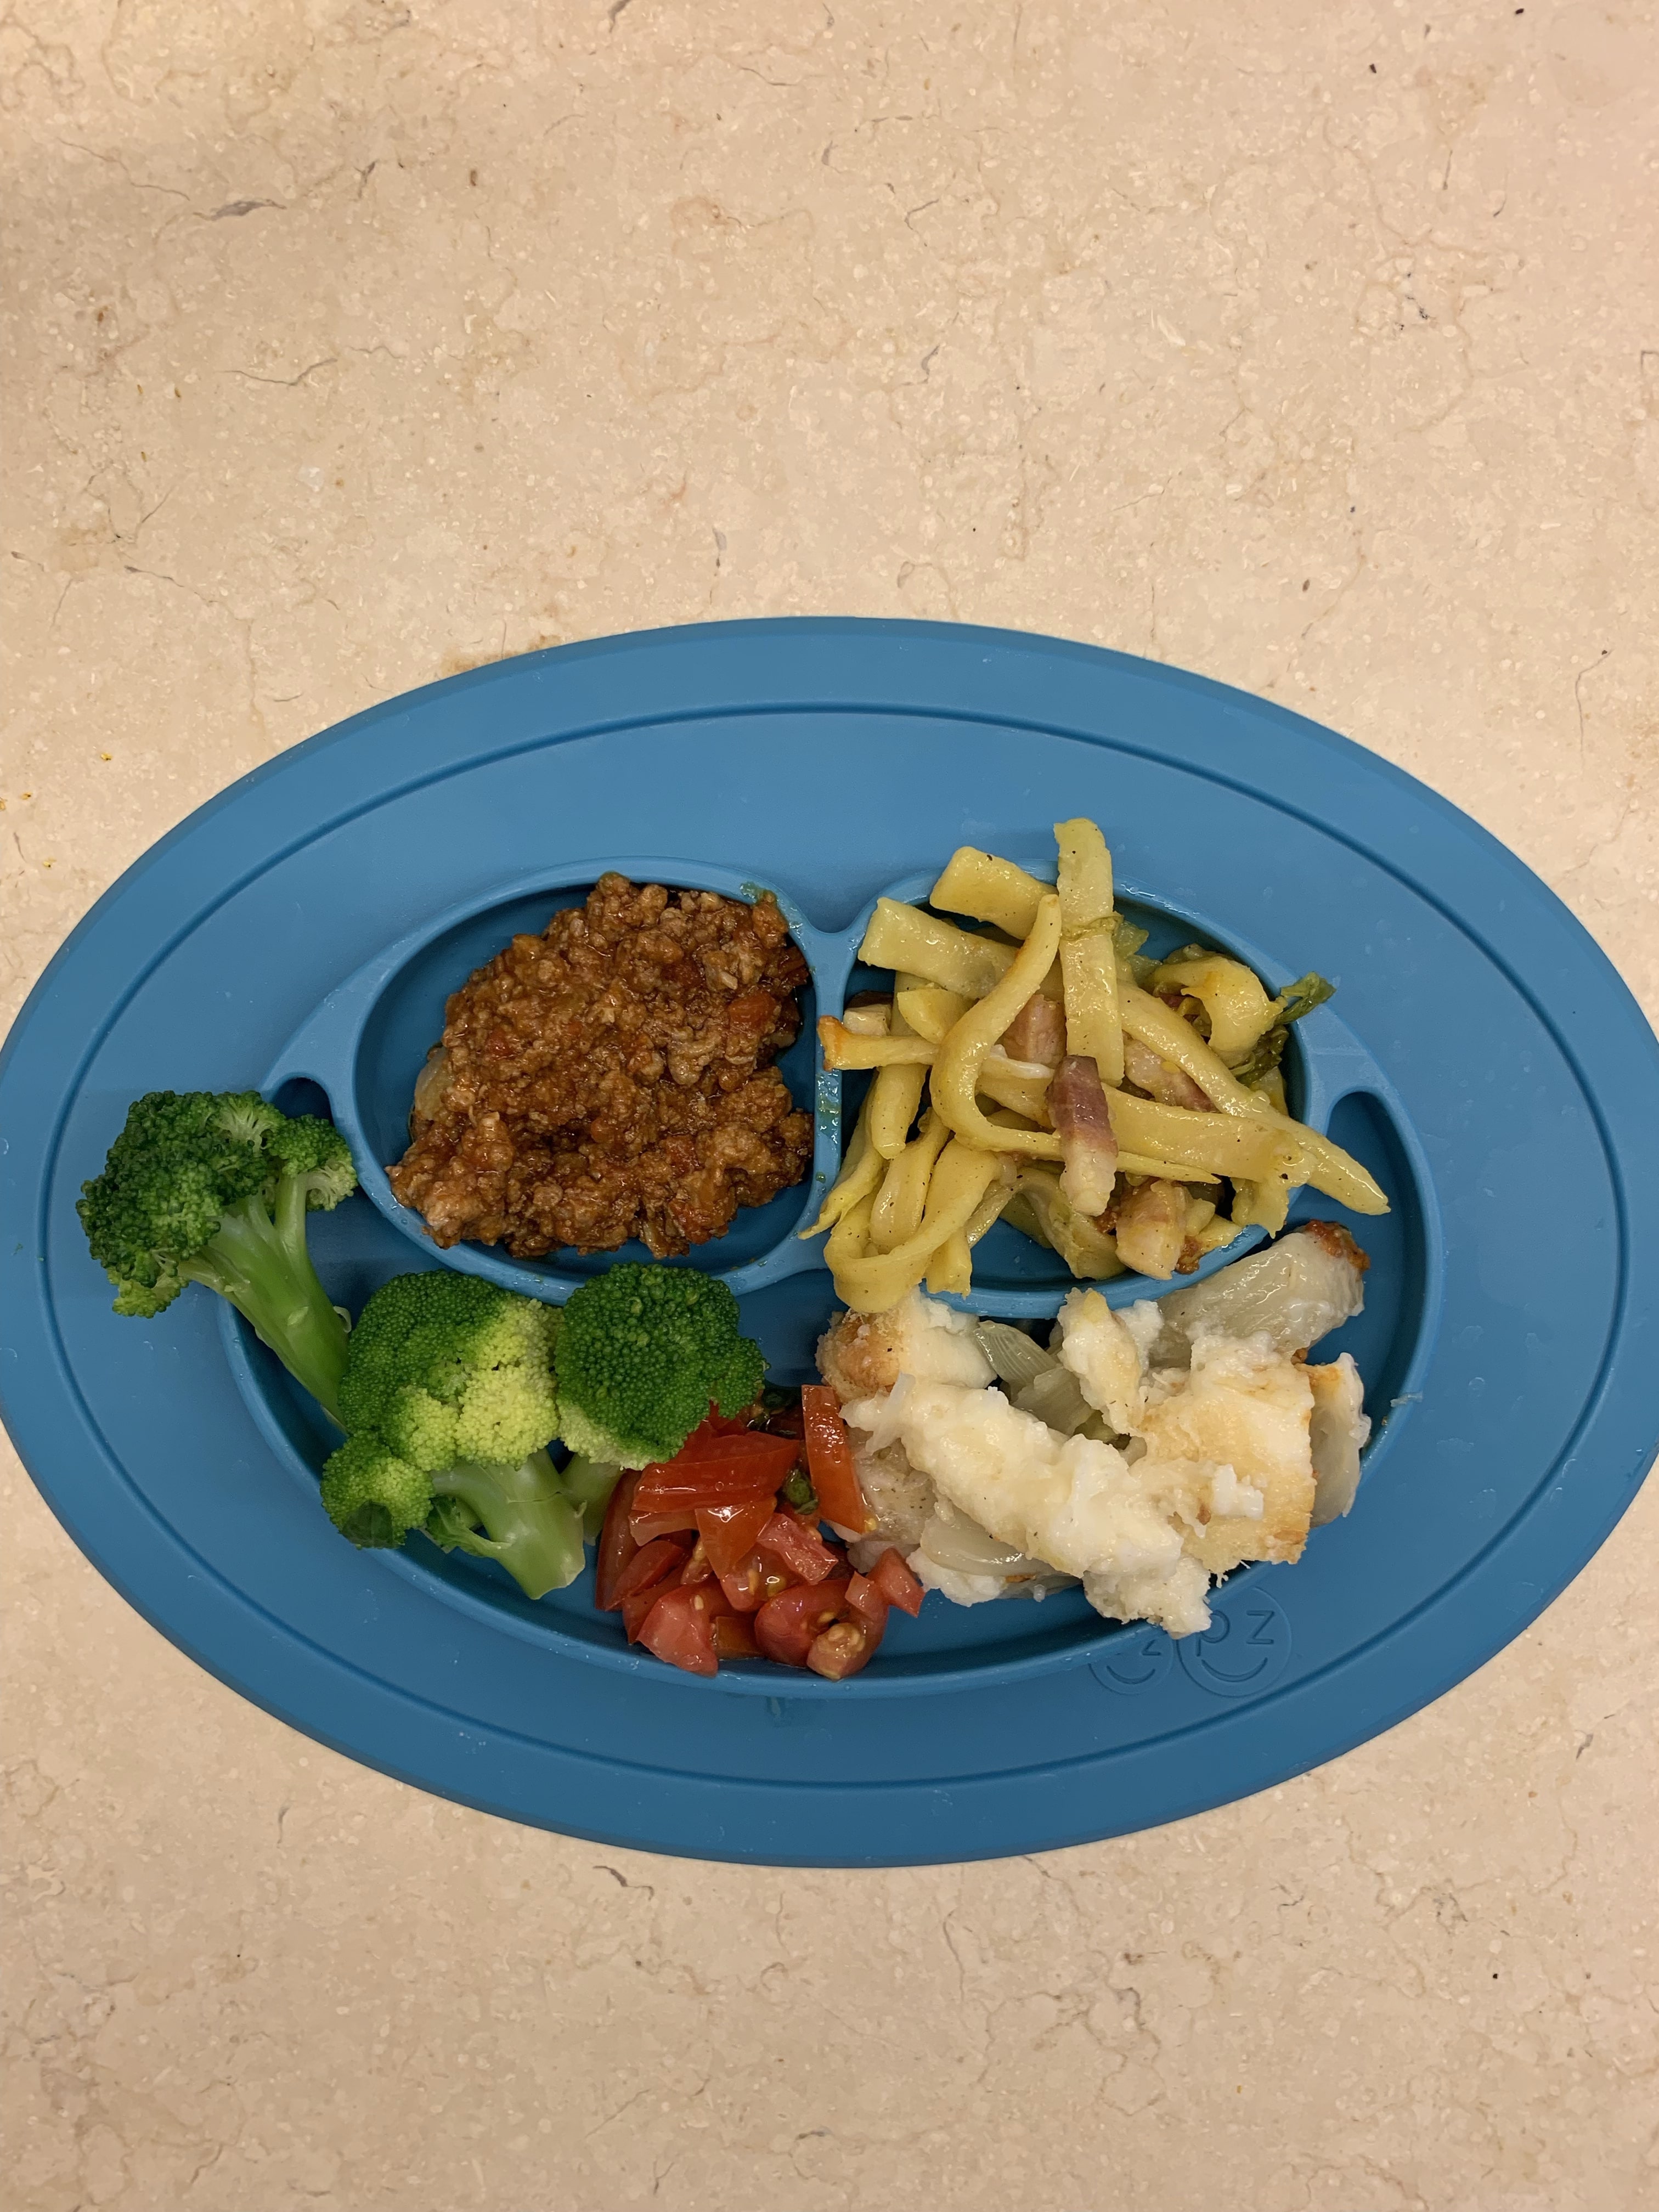 Toddler plate filled with pasta and vegetables. 